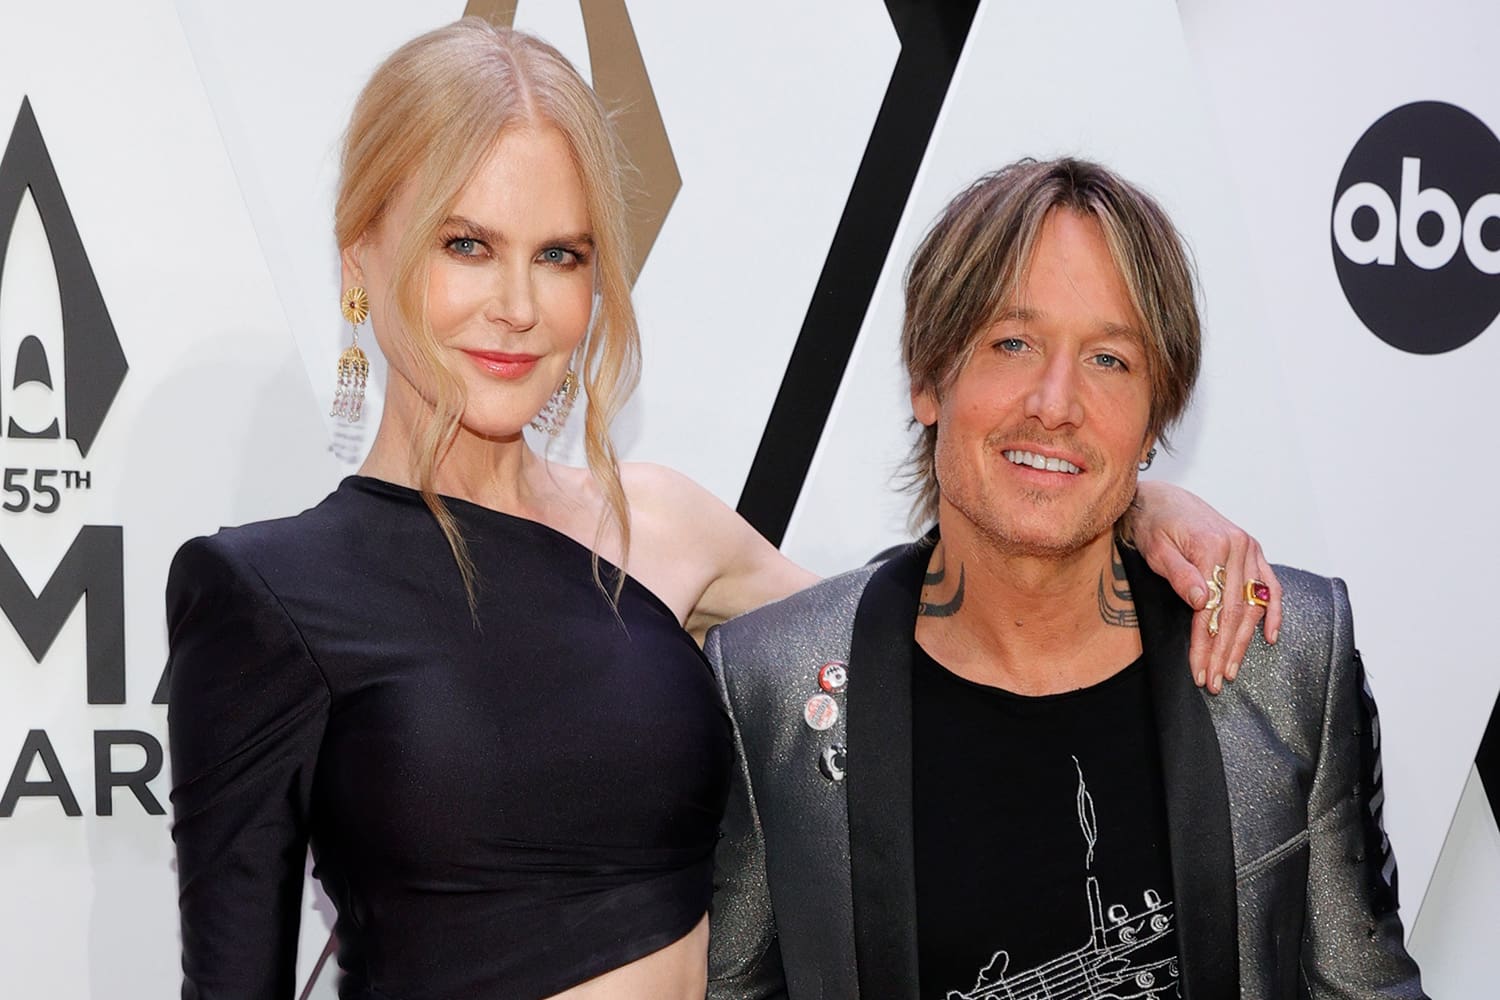 ”nicole-kidman-shows-pda-with-hubby-keith-urban-mid-concert-and-fans-love-it”